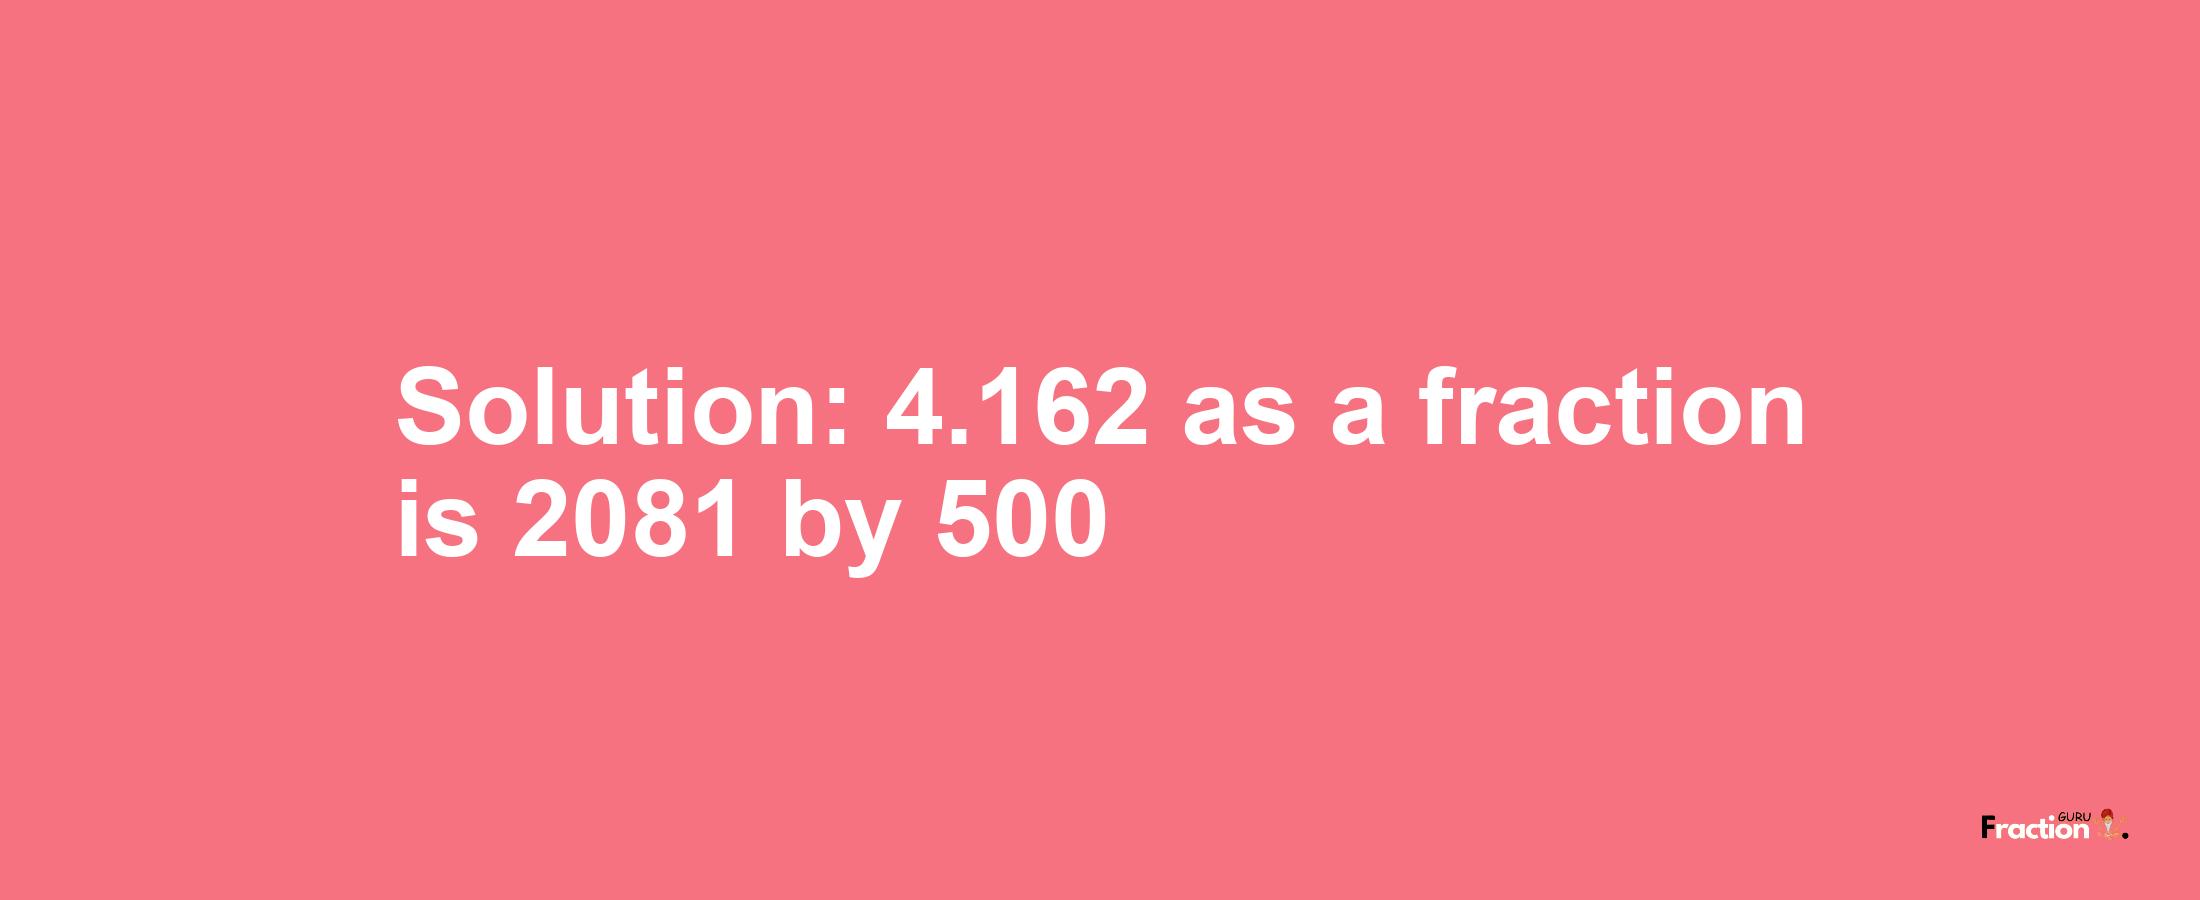 Solution:4.162 as a fraction is 2081/500